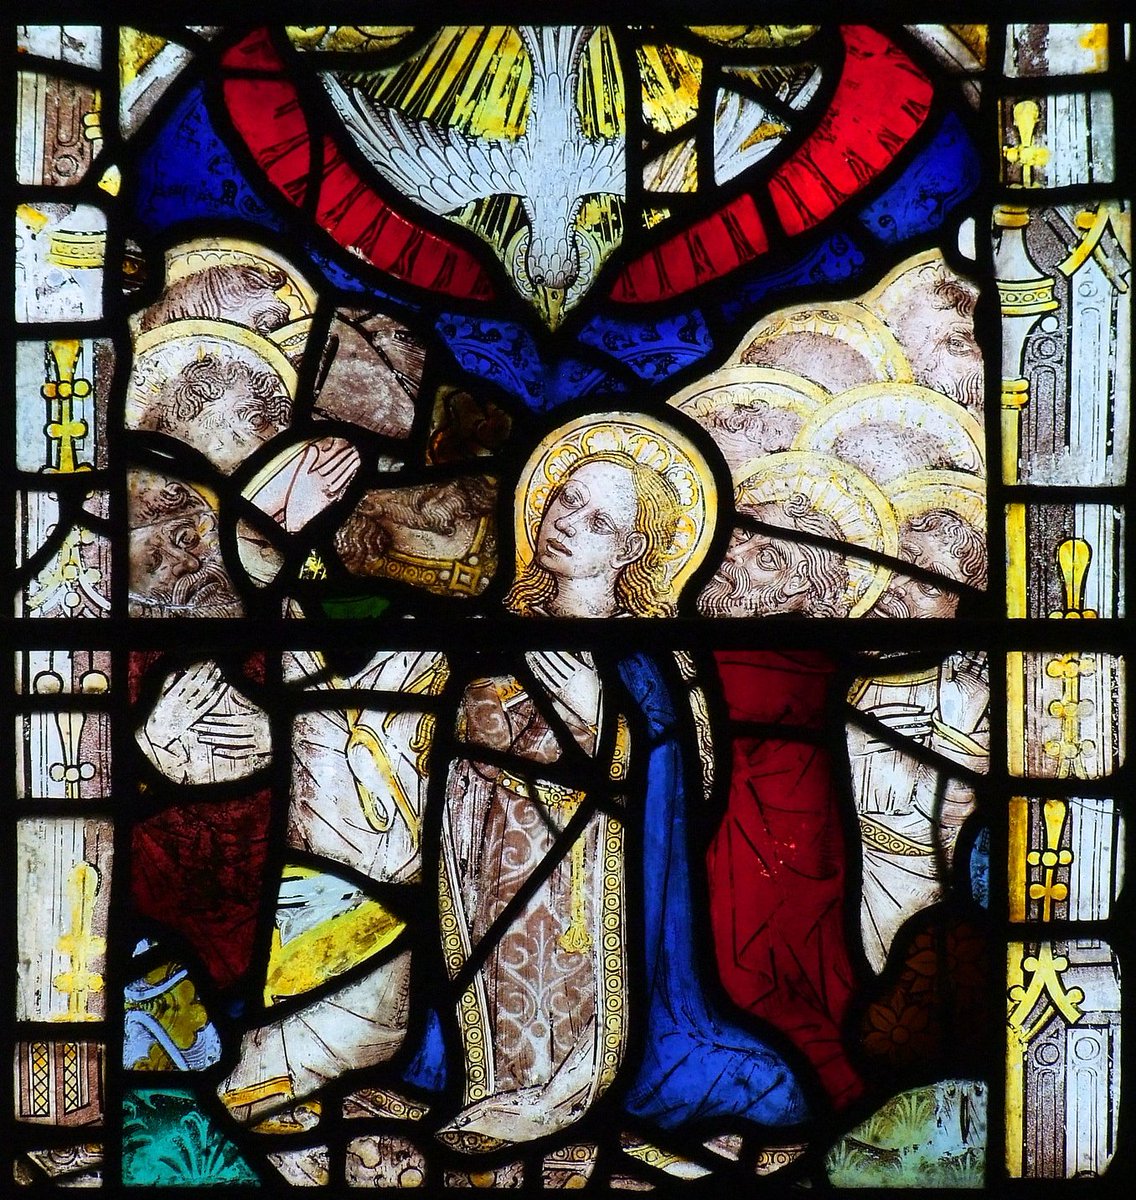 Today is the feast of Pentecost, traditionally known as Whitsun. In 15th Century glass at East Harling, Norfolk, the Blessed Virgin stands centrally flanked by the Disciples, and they look up to see the dove of the Holy Spirit descending. East Harling: norfolkchurches.co.uk/eastharling/ea…